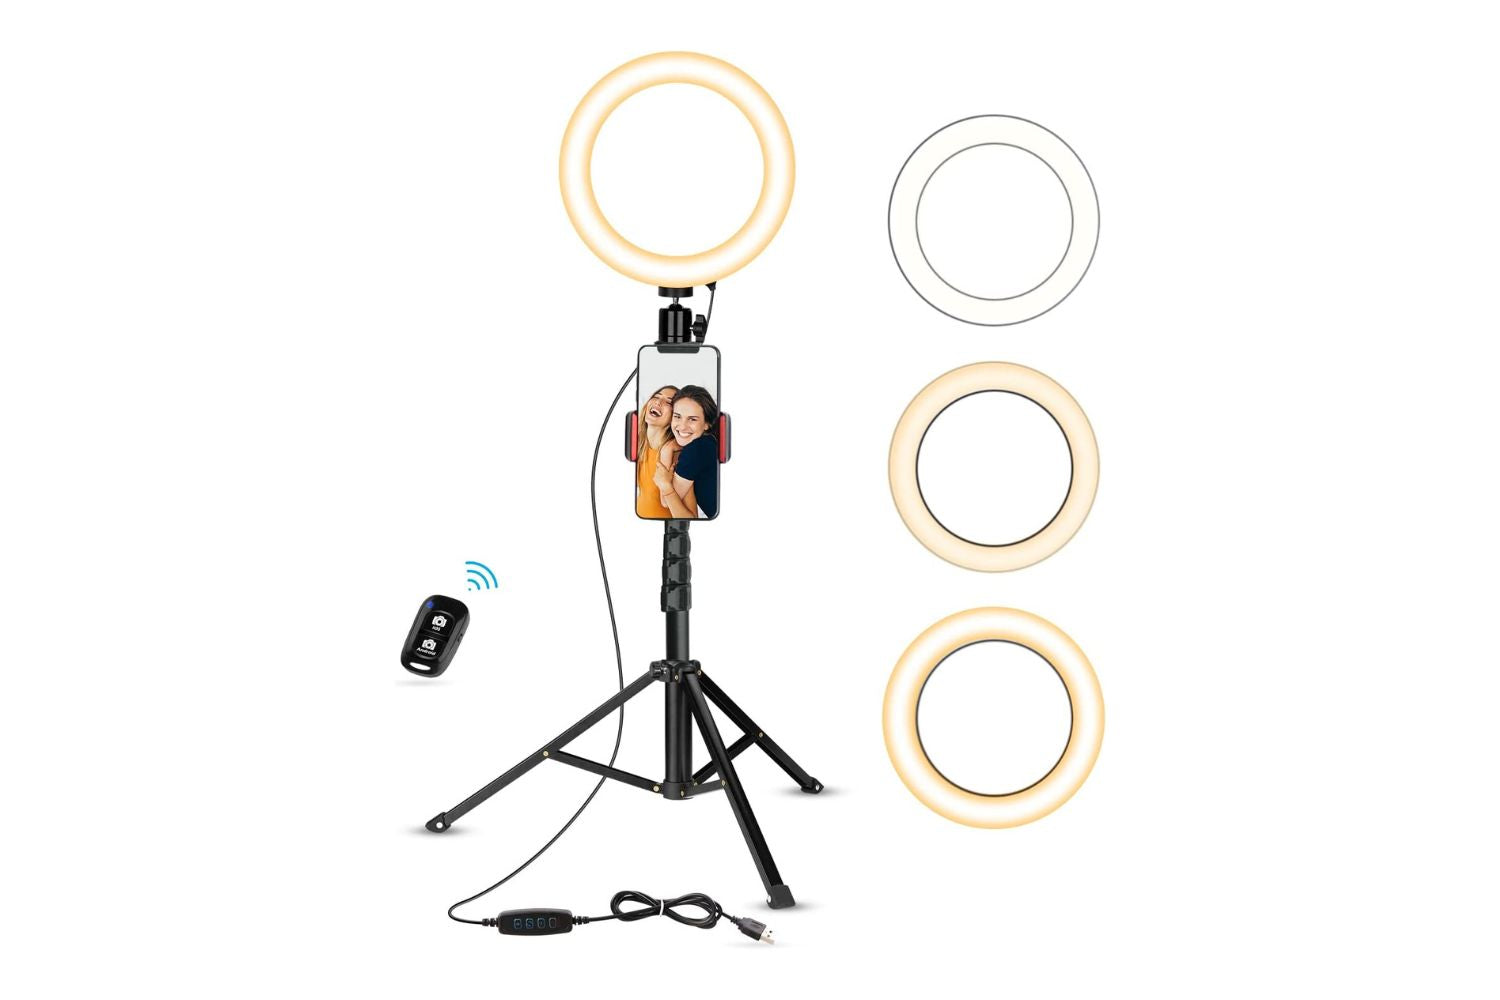 Neewer 20-inch LED Ring Light Kit - Adjustable Color Temperature